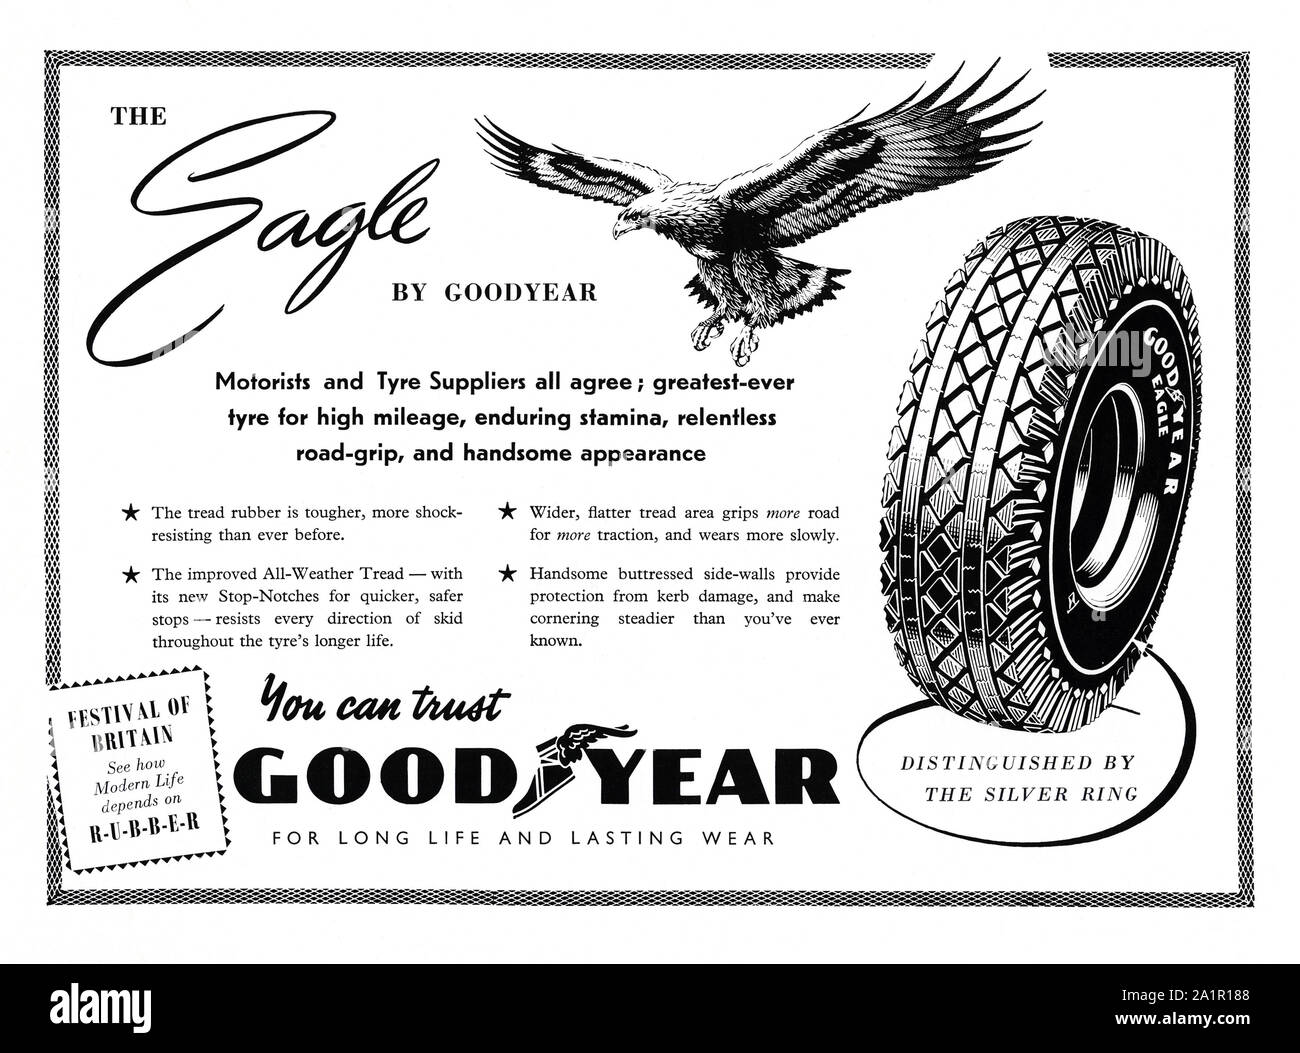 Advert for Eagle brand Goodyear tyres, 1951. . The advert features an  illustration of an eagle. The Goodyear Tire and Rubber Company is an  American multinational tyre (tire) manufacturing company founded in